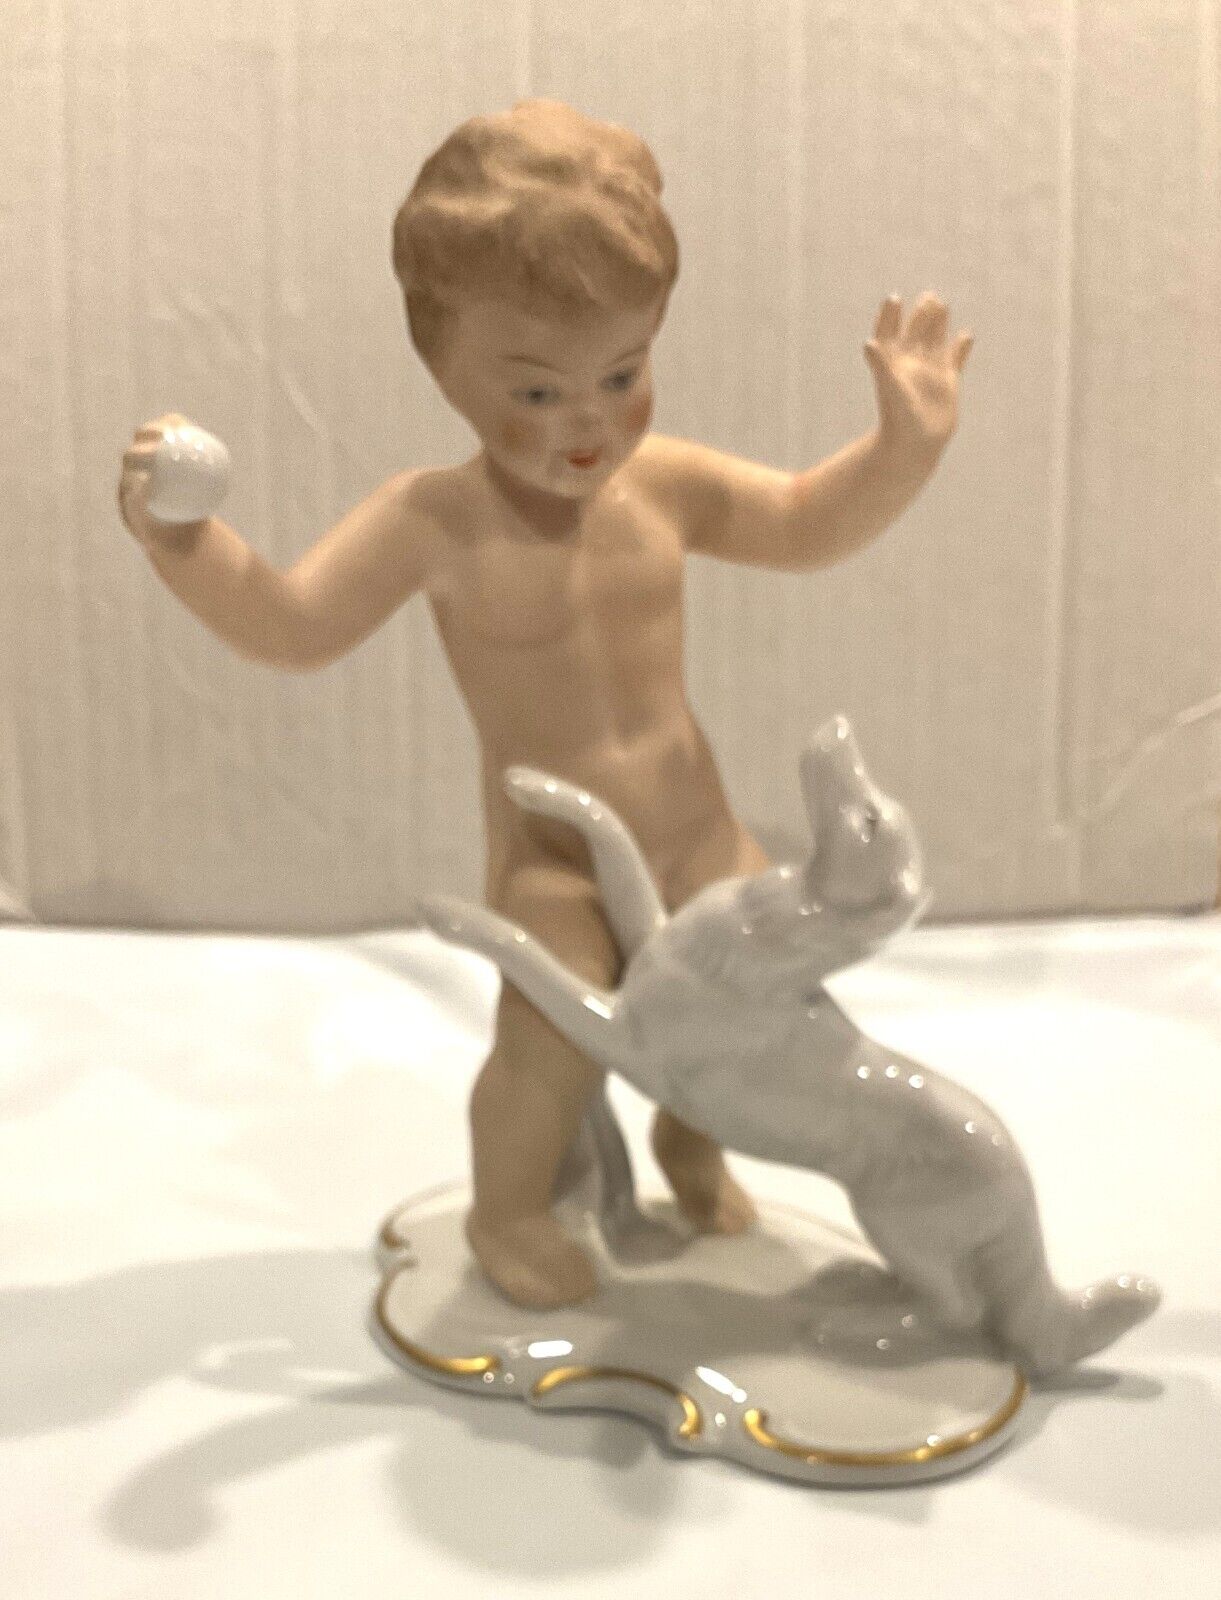 1930s  or 1940s Porcelain Figurine - Young Boy Playing with Borzoi Dog, Germany